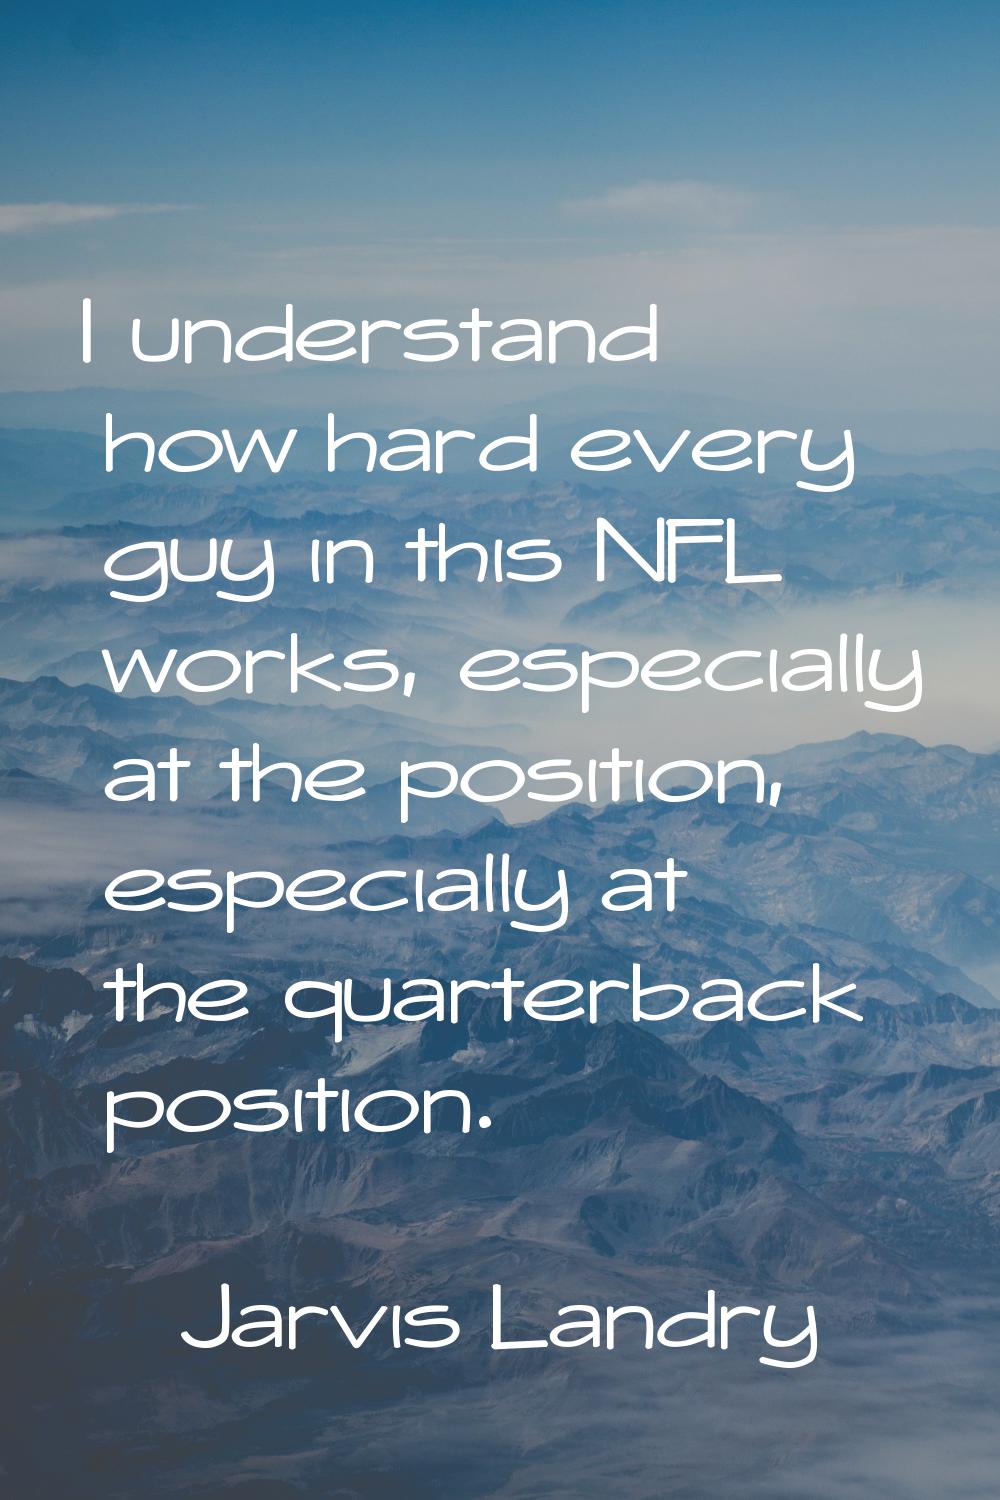 I understand how hard every guy in this NFL works, especially at the position, especially at the qu